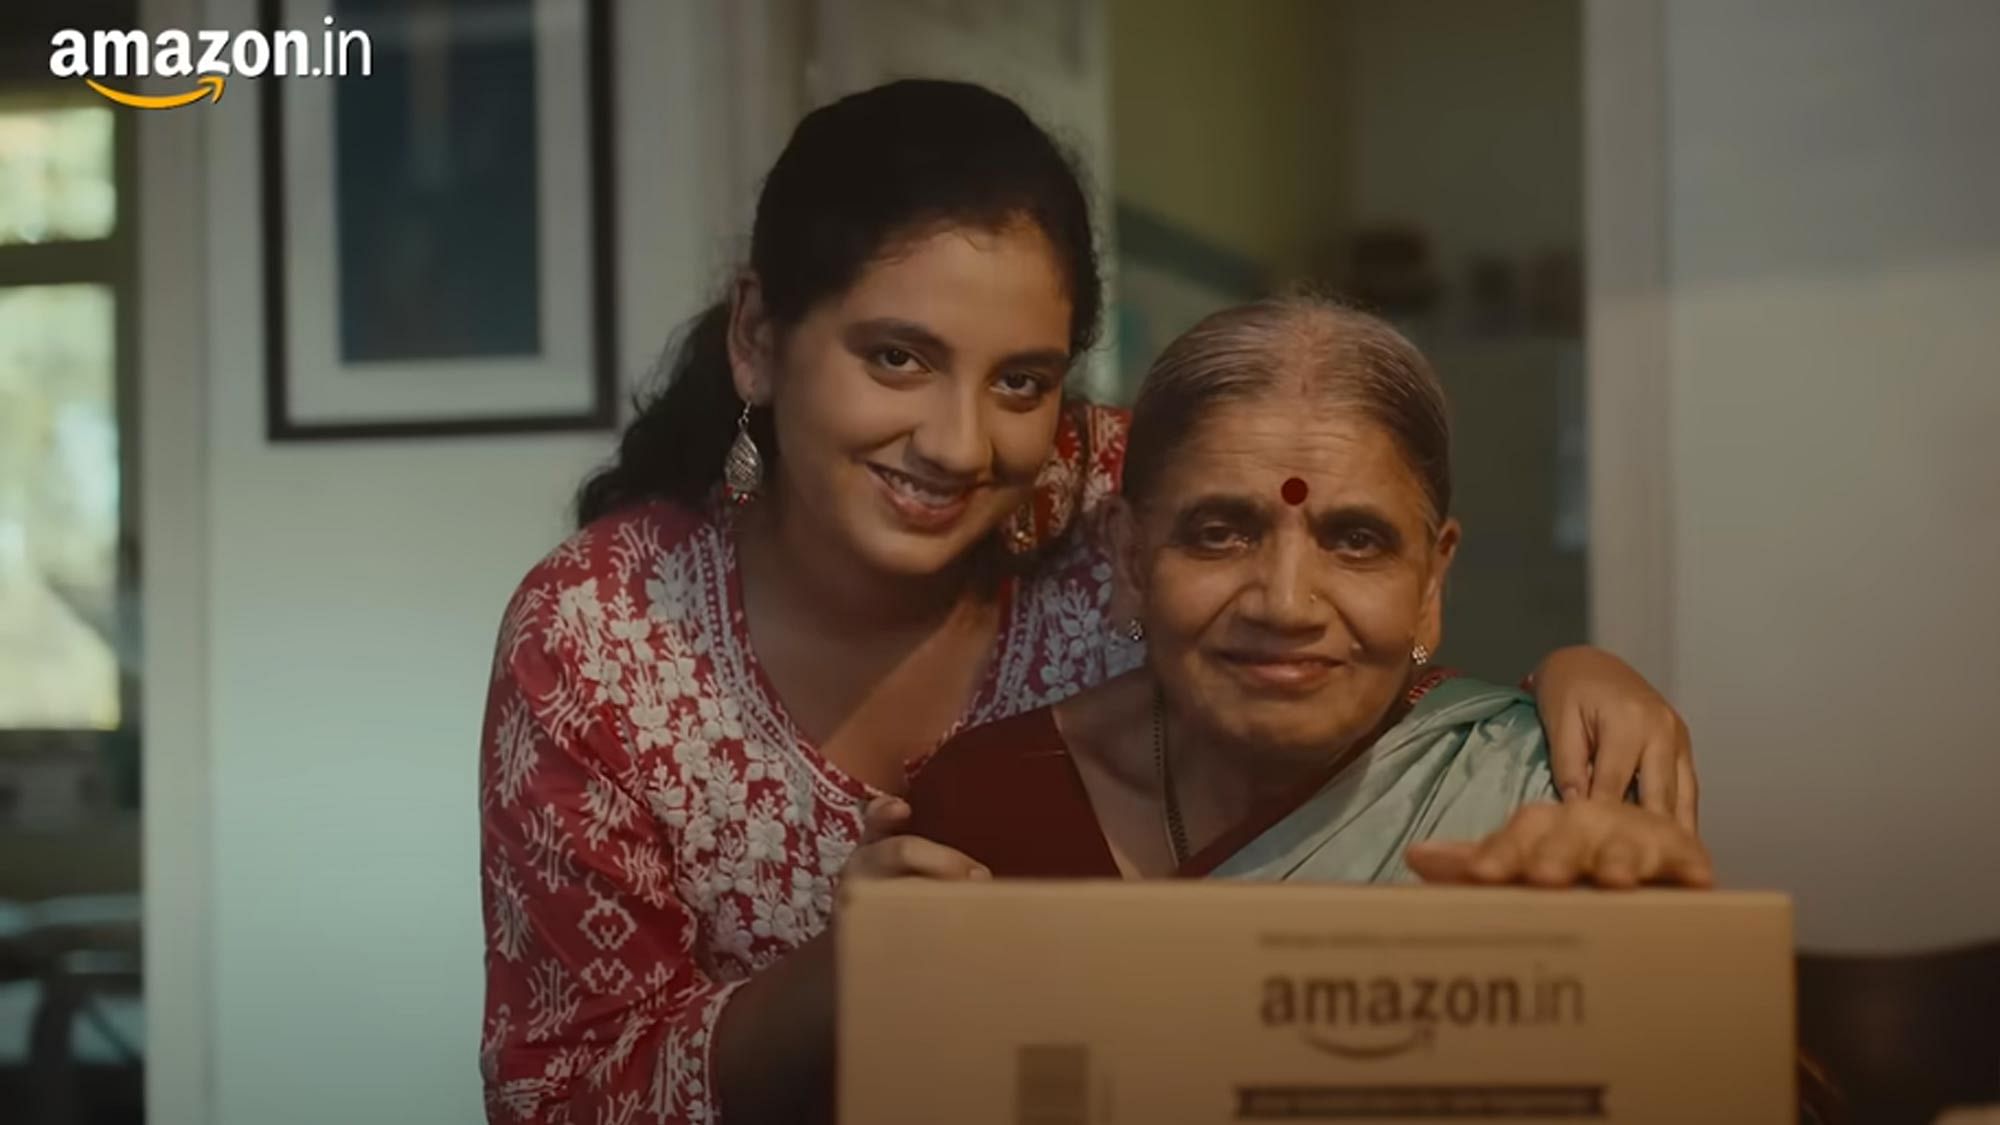 <div class="paragraphs"><p>Celebrating 10 Years in India: Amazon Thanks Its Customers and Partners</p></div>